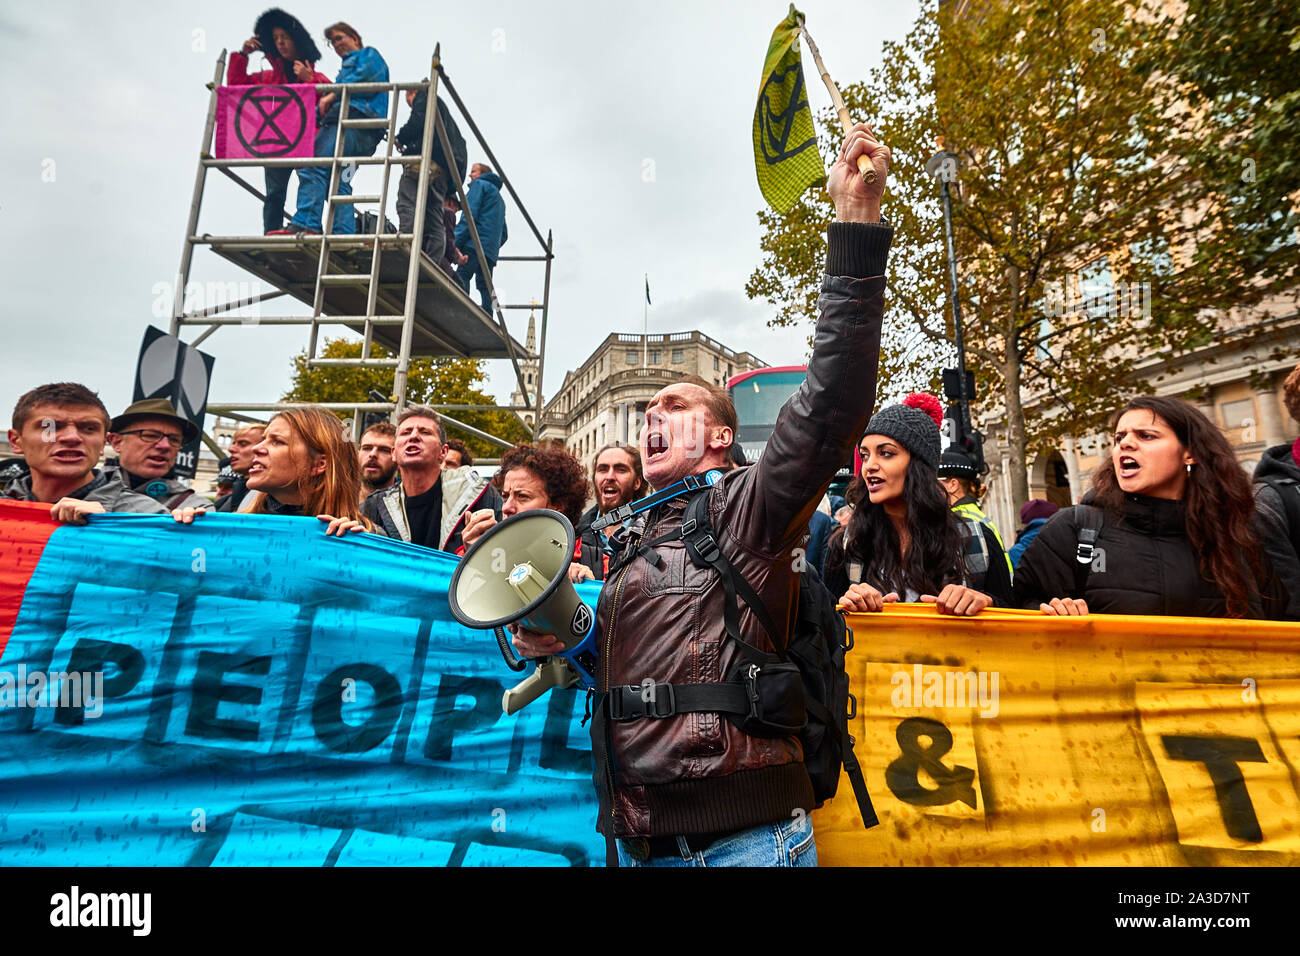 London, U.K. - Oct 7, 2019: Environmental campaigners from Extinction Rebellion protesting in Trafalgar Square on the first day of a planned two weeks of protests. Stock Photo